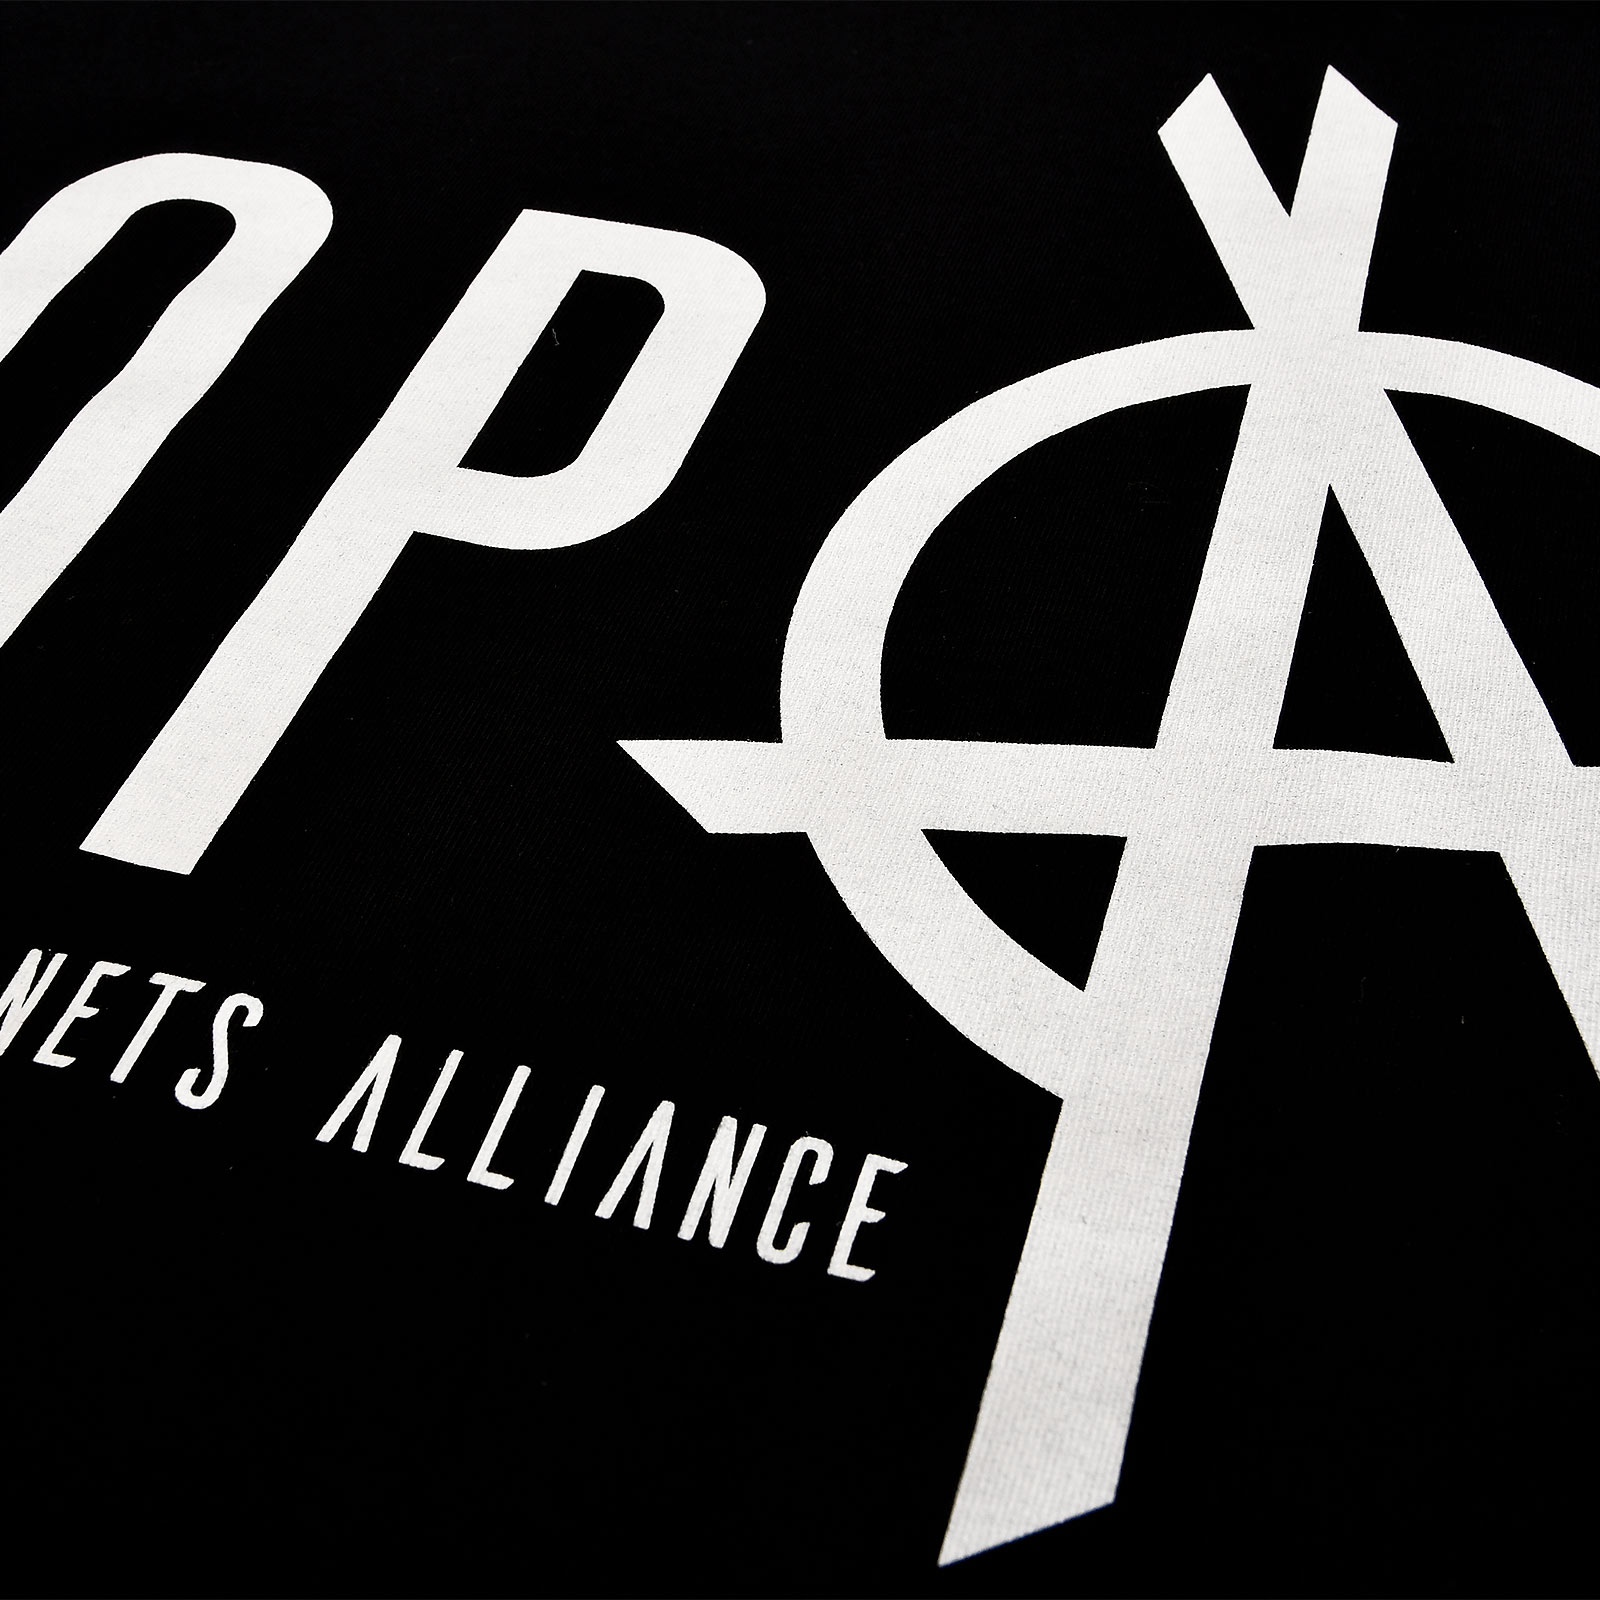 Outer Planets Alliance Logo T-Shirt for The Expanse Fans black